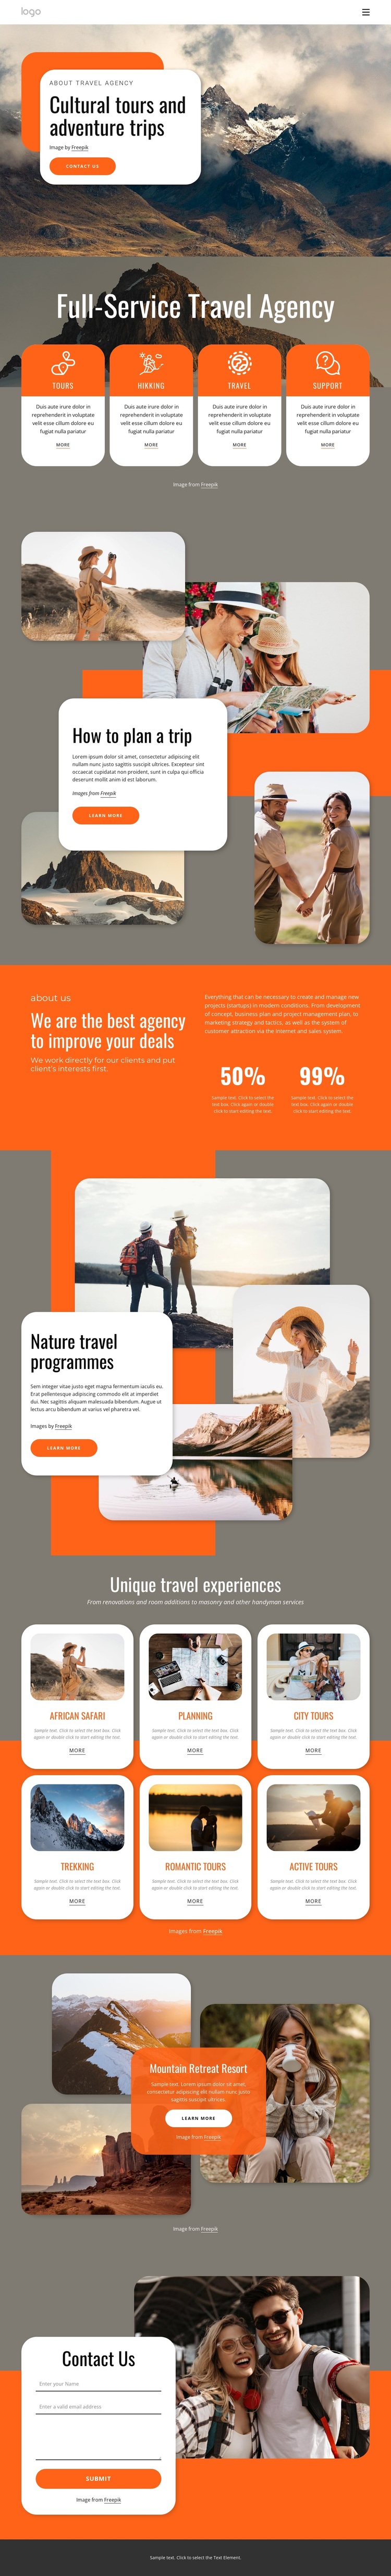 Group travel for all ages Template